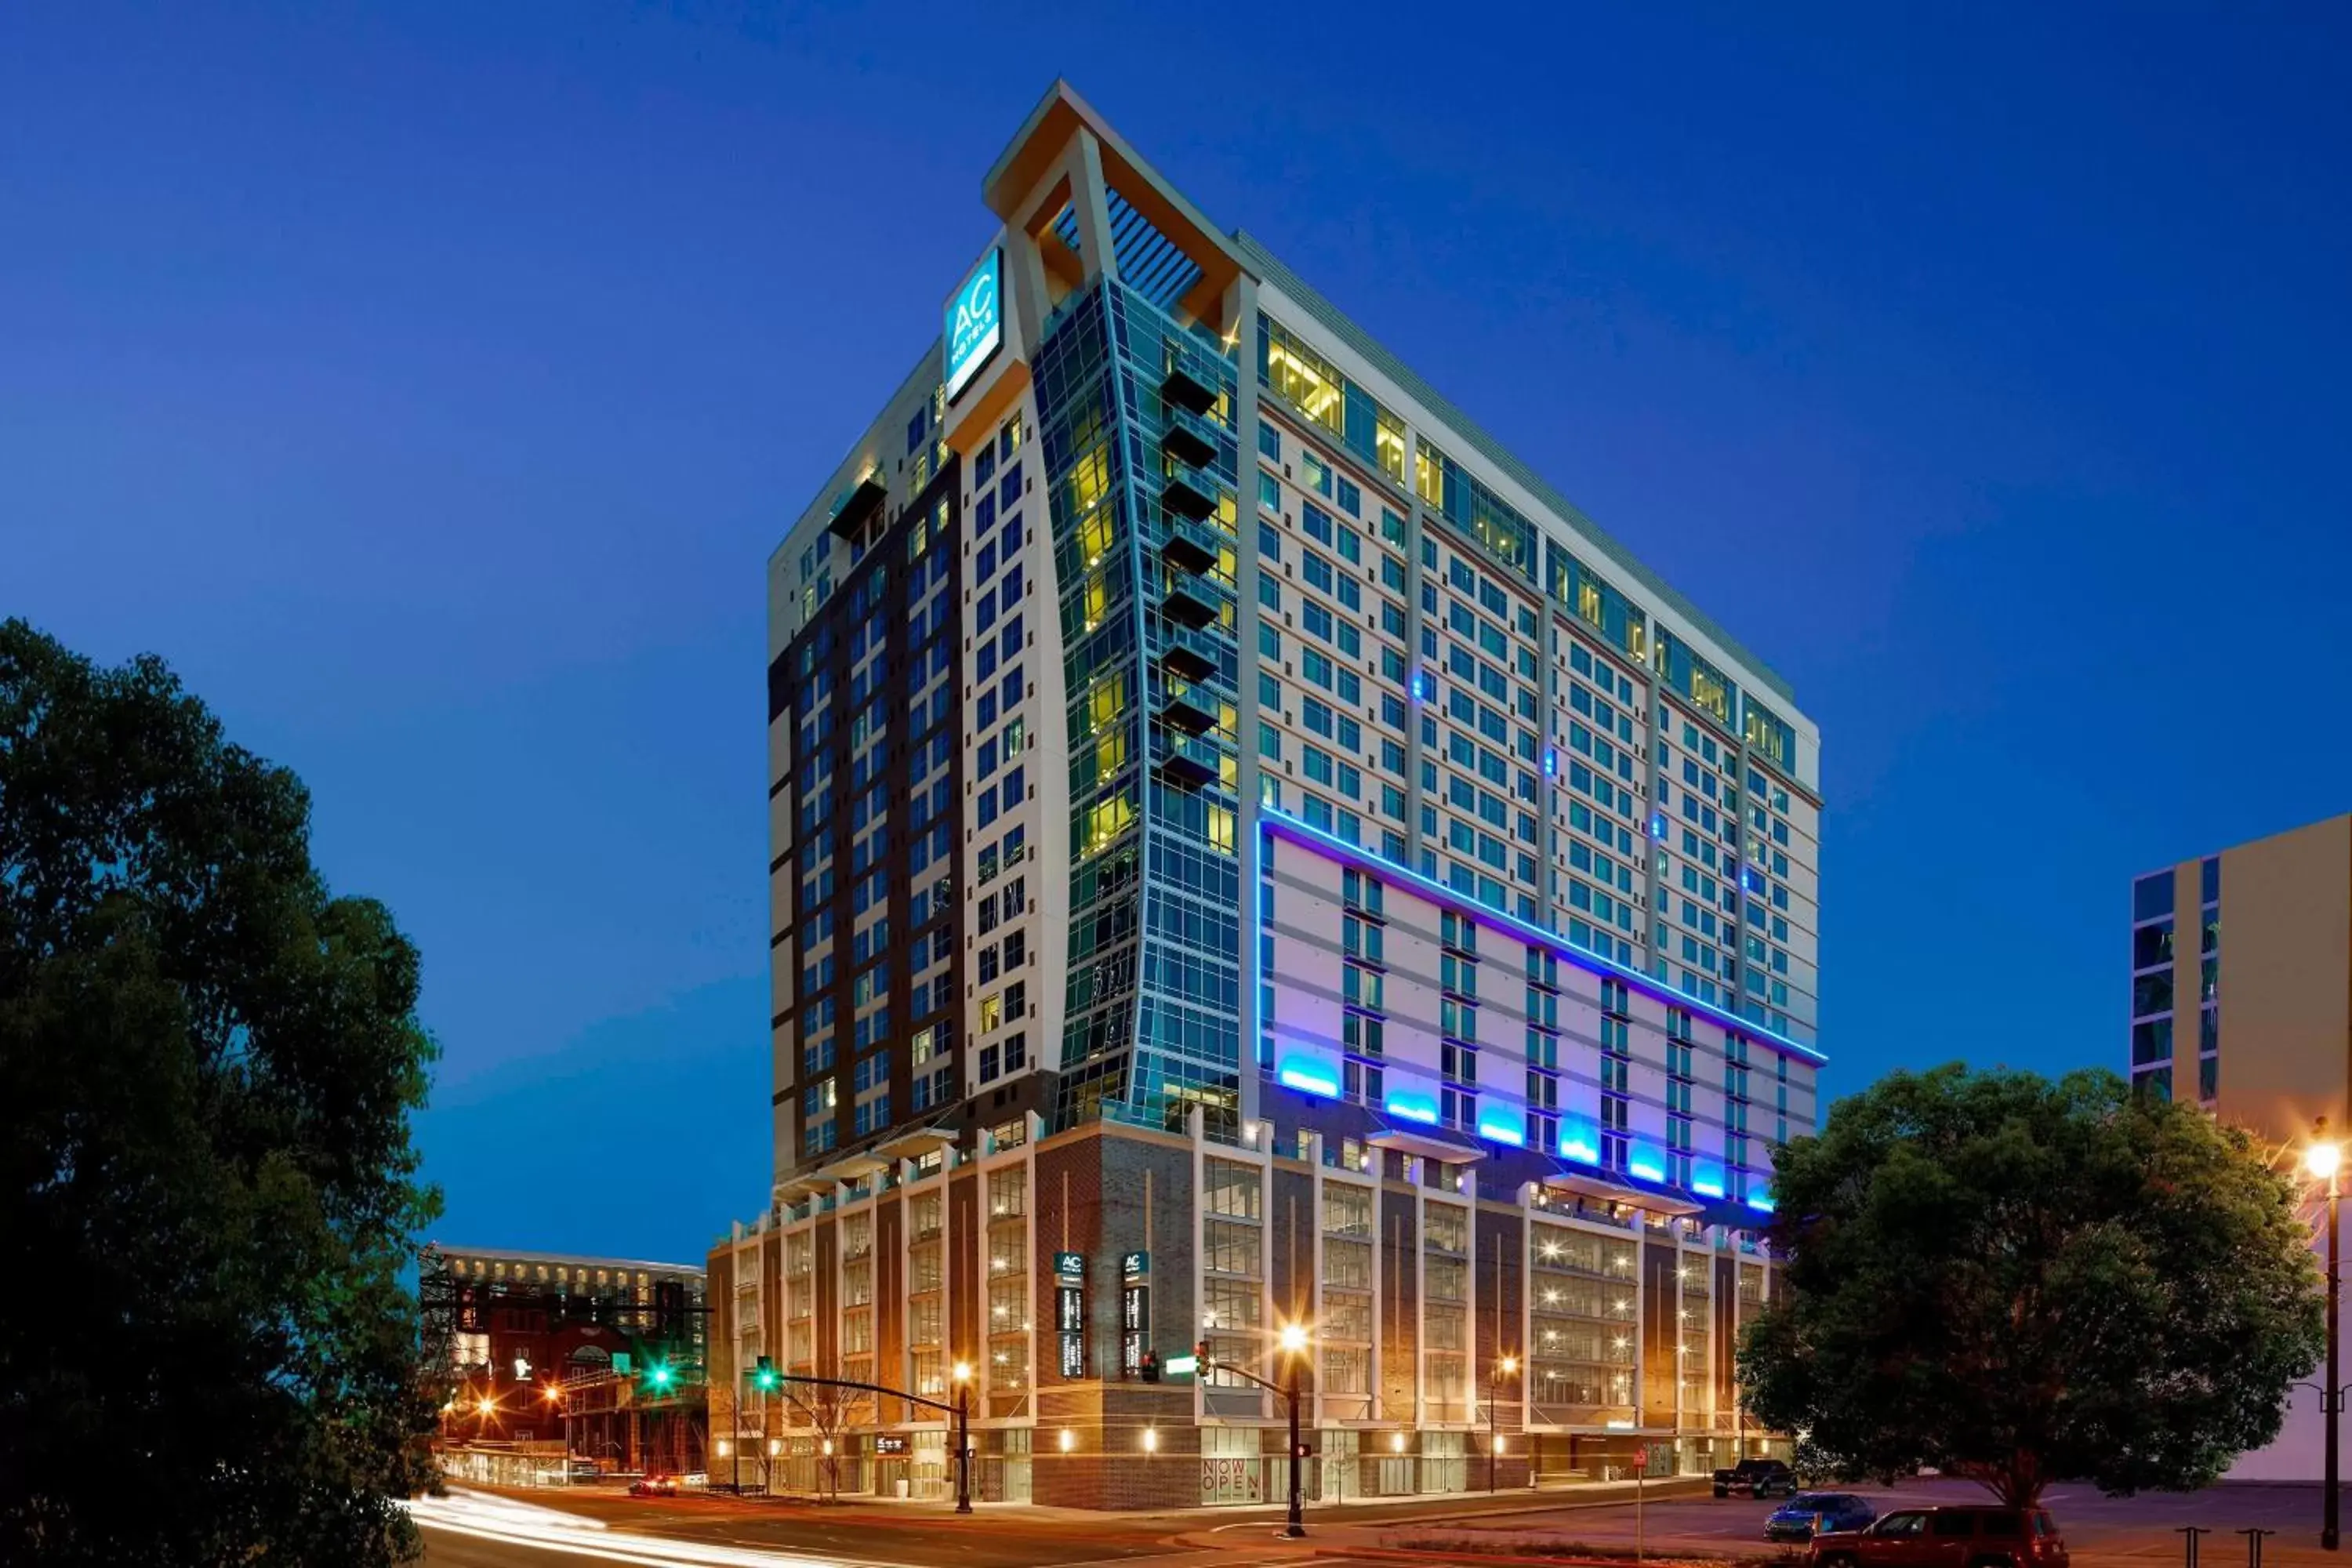 Property Building in Residence Inn by Marriott Nashville Downtown/Convention Center